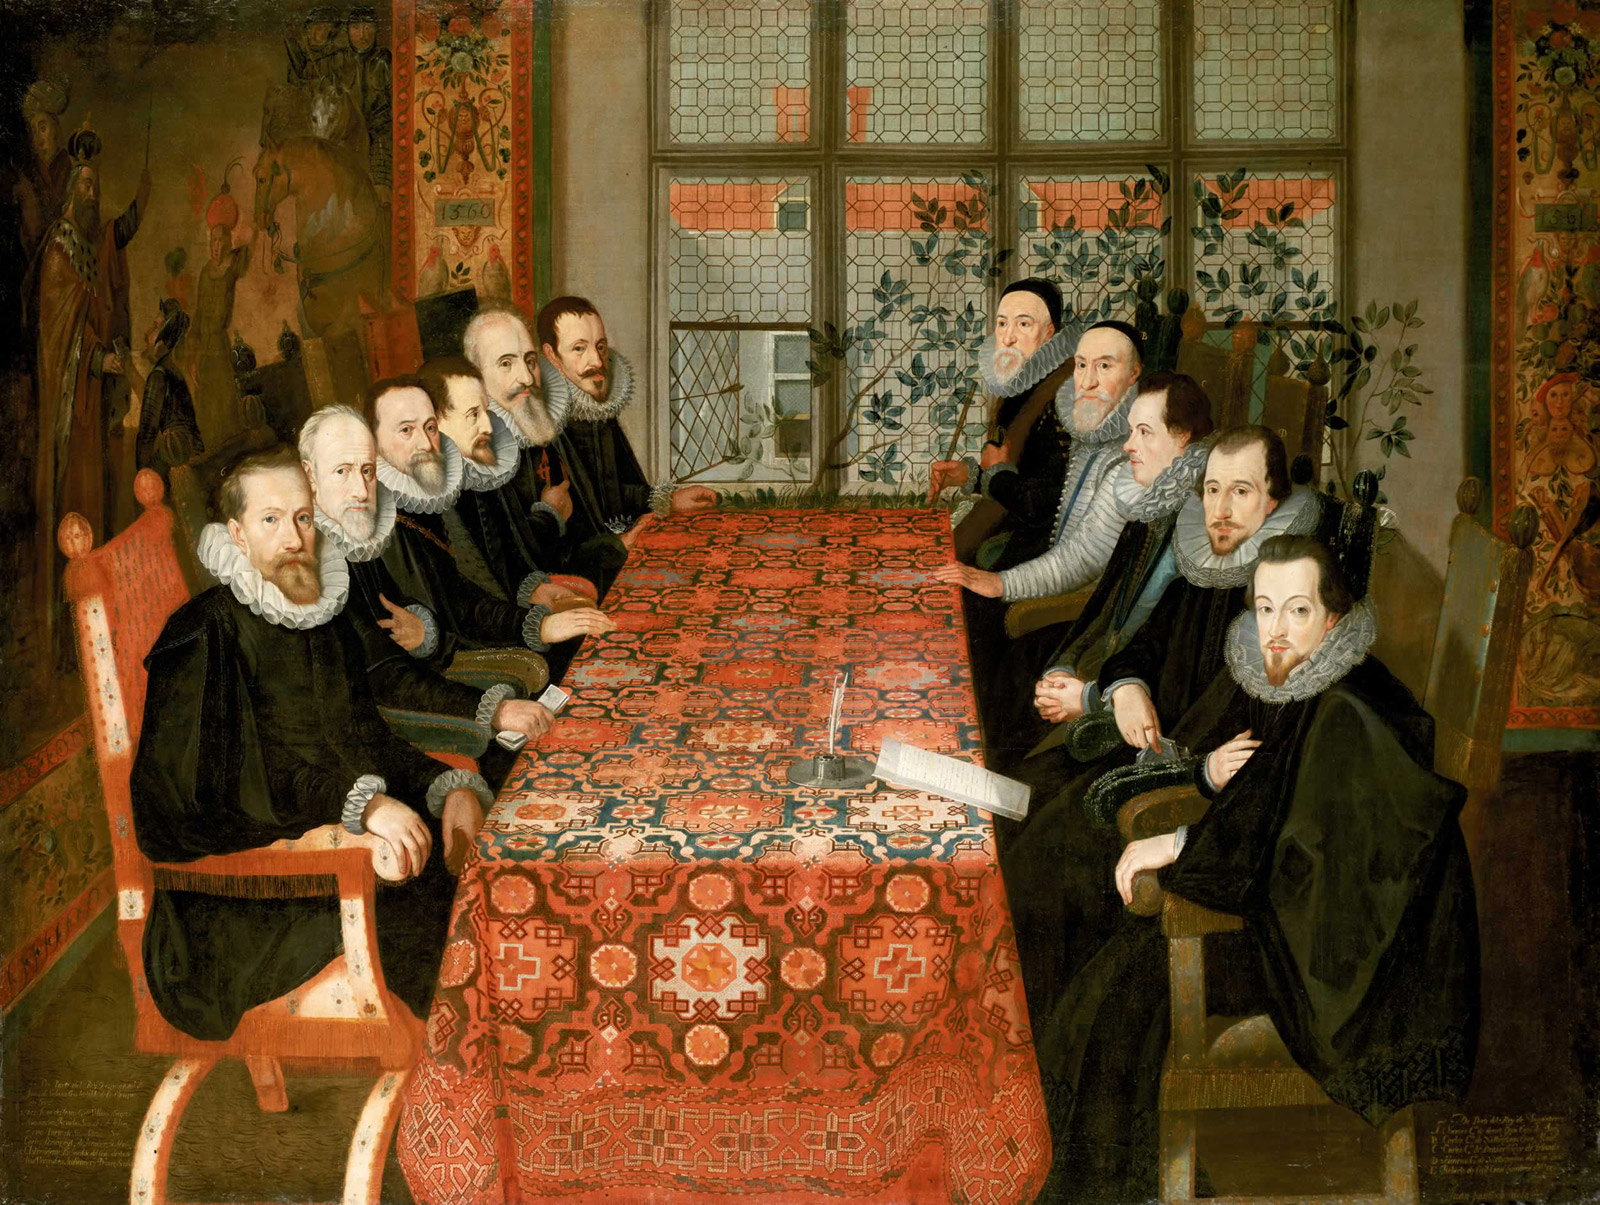 Seventeenth-century painting attributed to Juan Pantoja de la Cruz depicting the sixteen oh four Somerset House Conference, in which a carpet was used as the tablecloth.